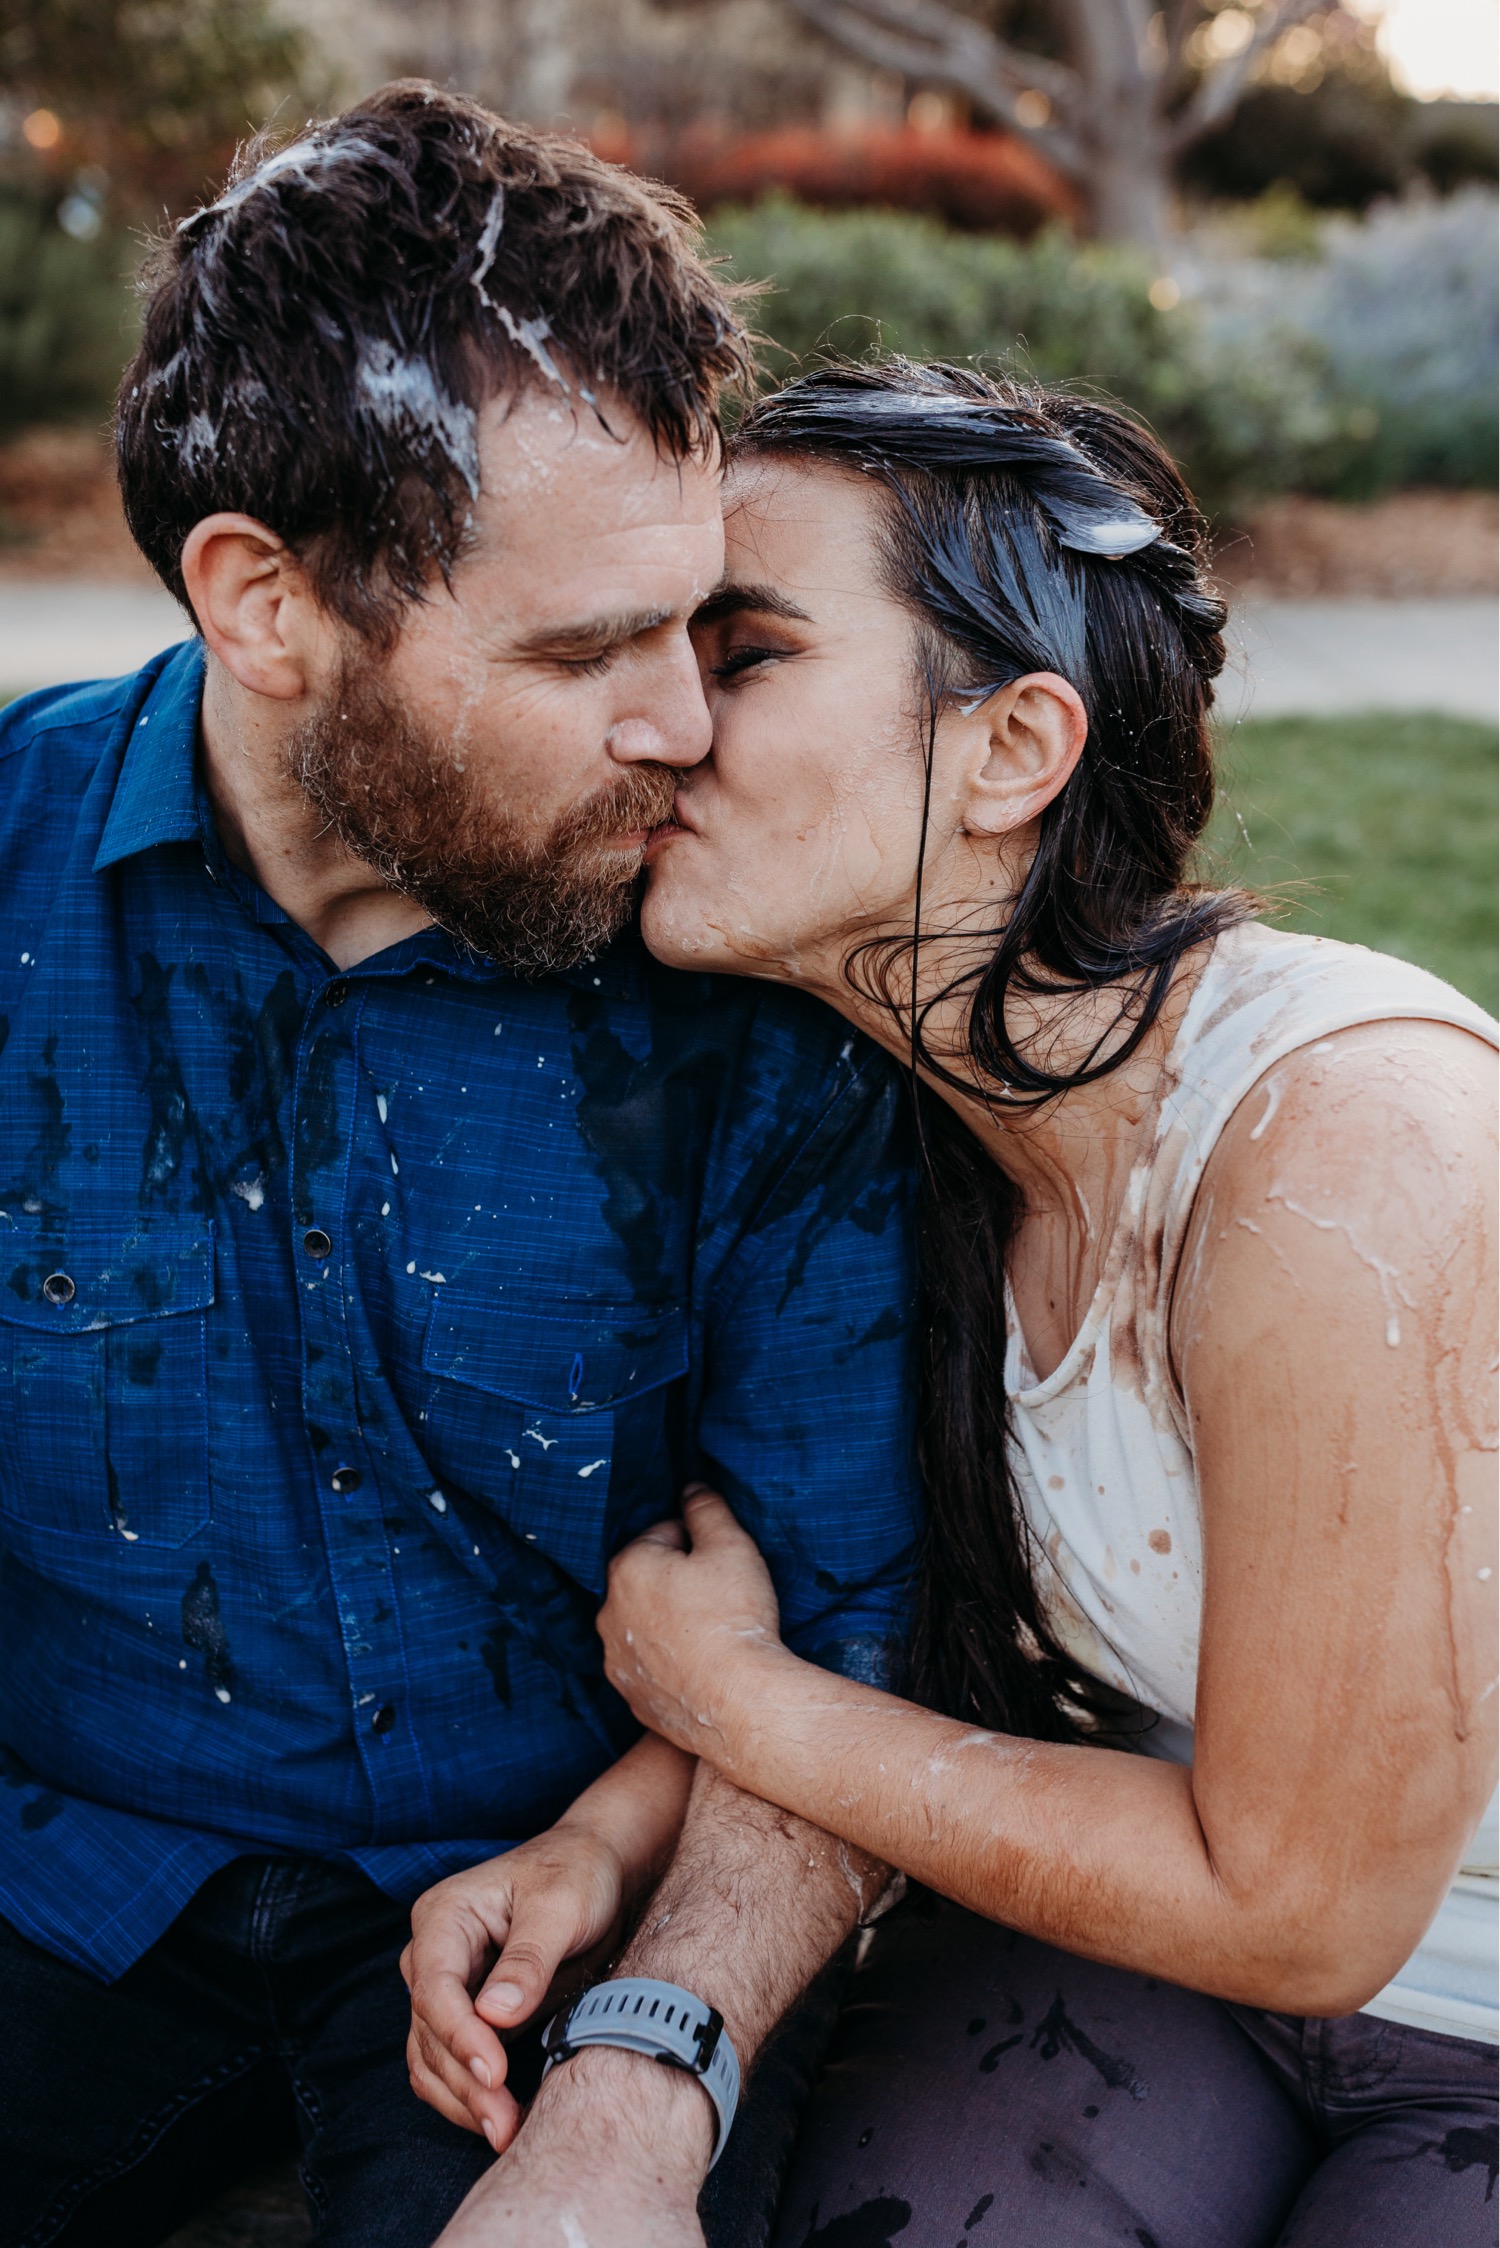 Couple covered in ice cream kisses in the park during their engagement photoshoot.